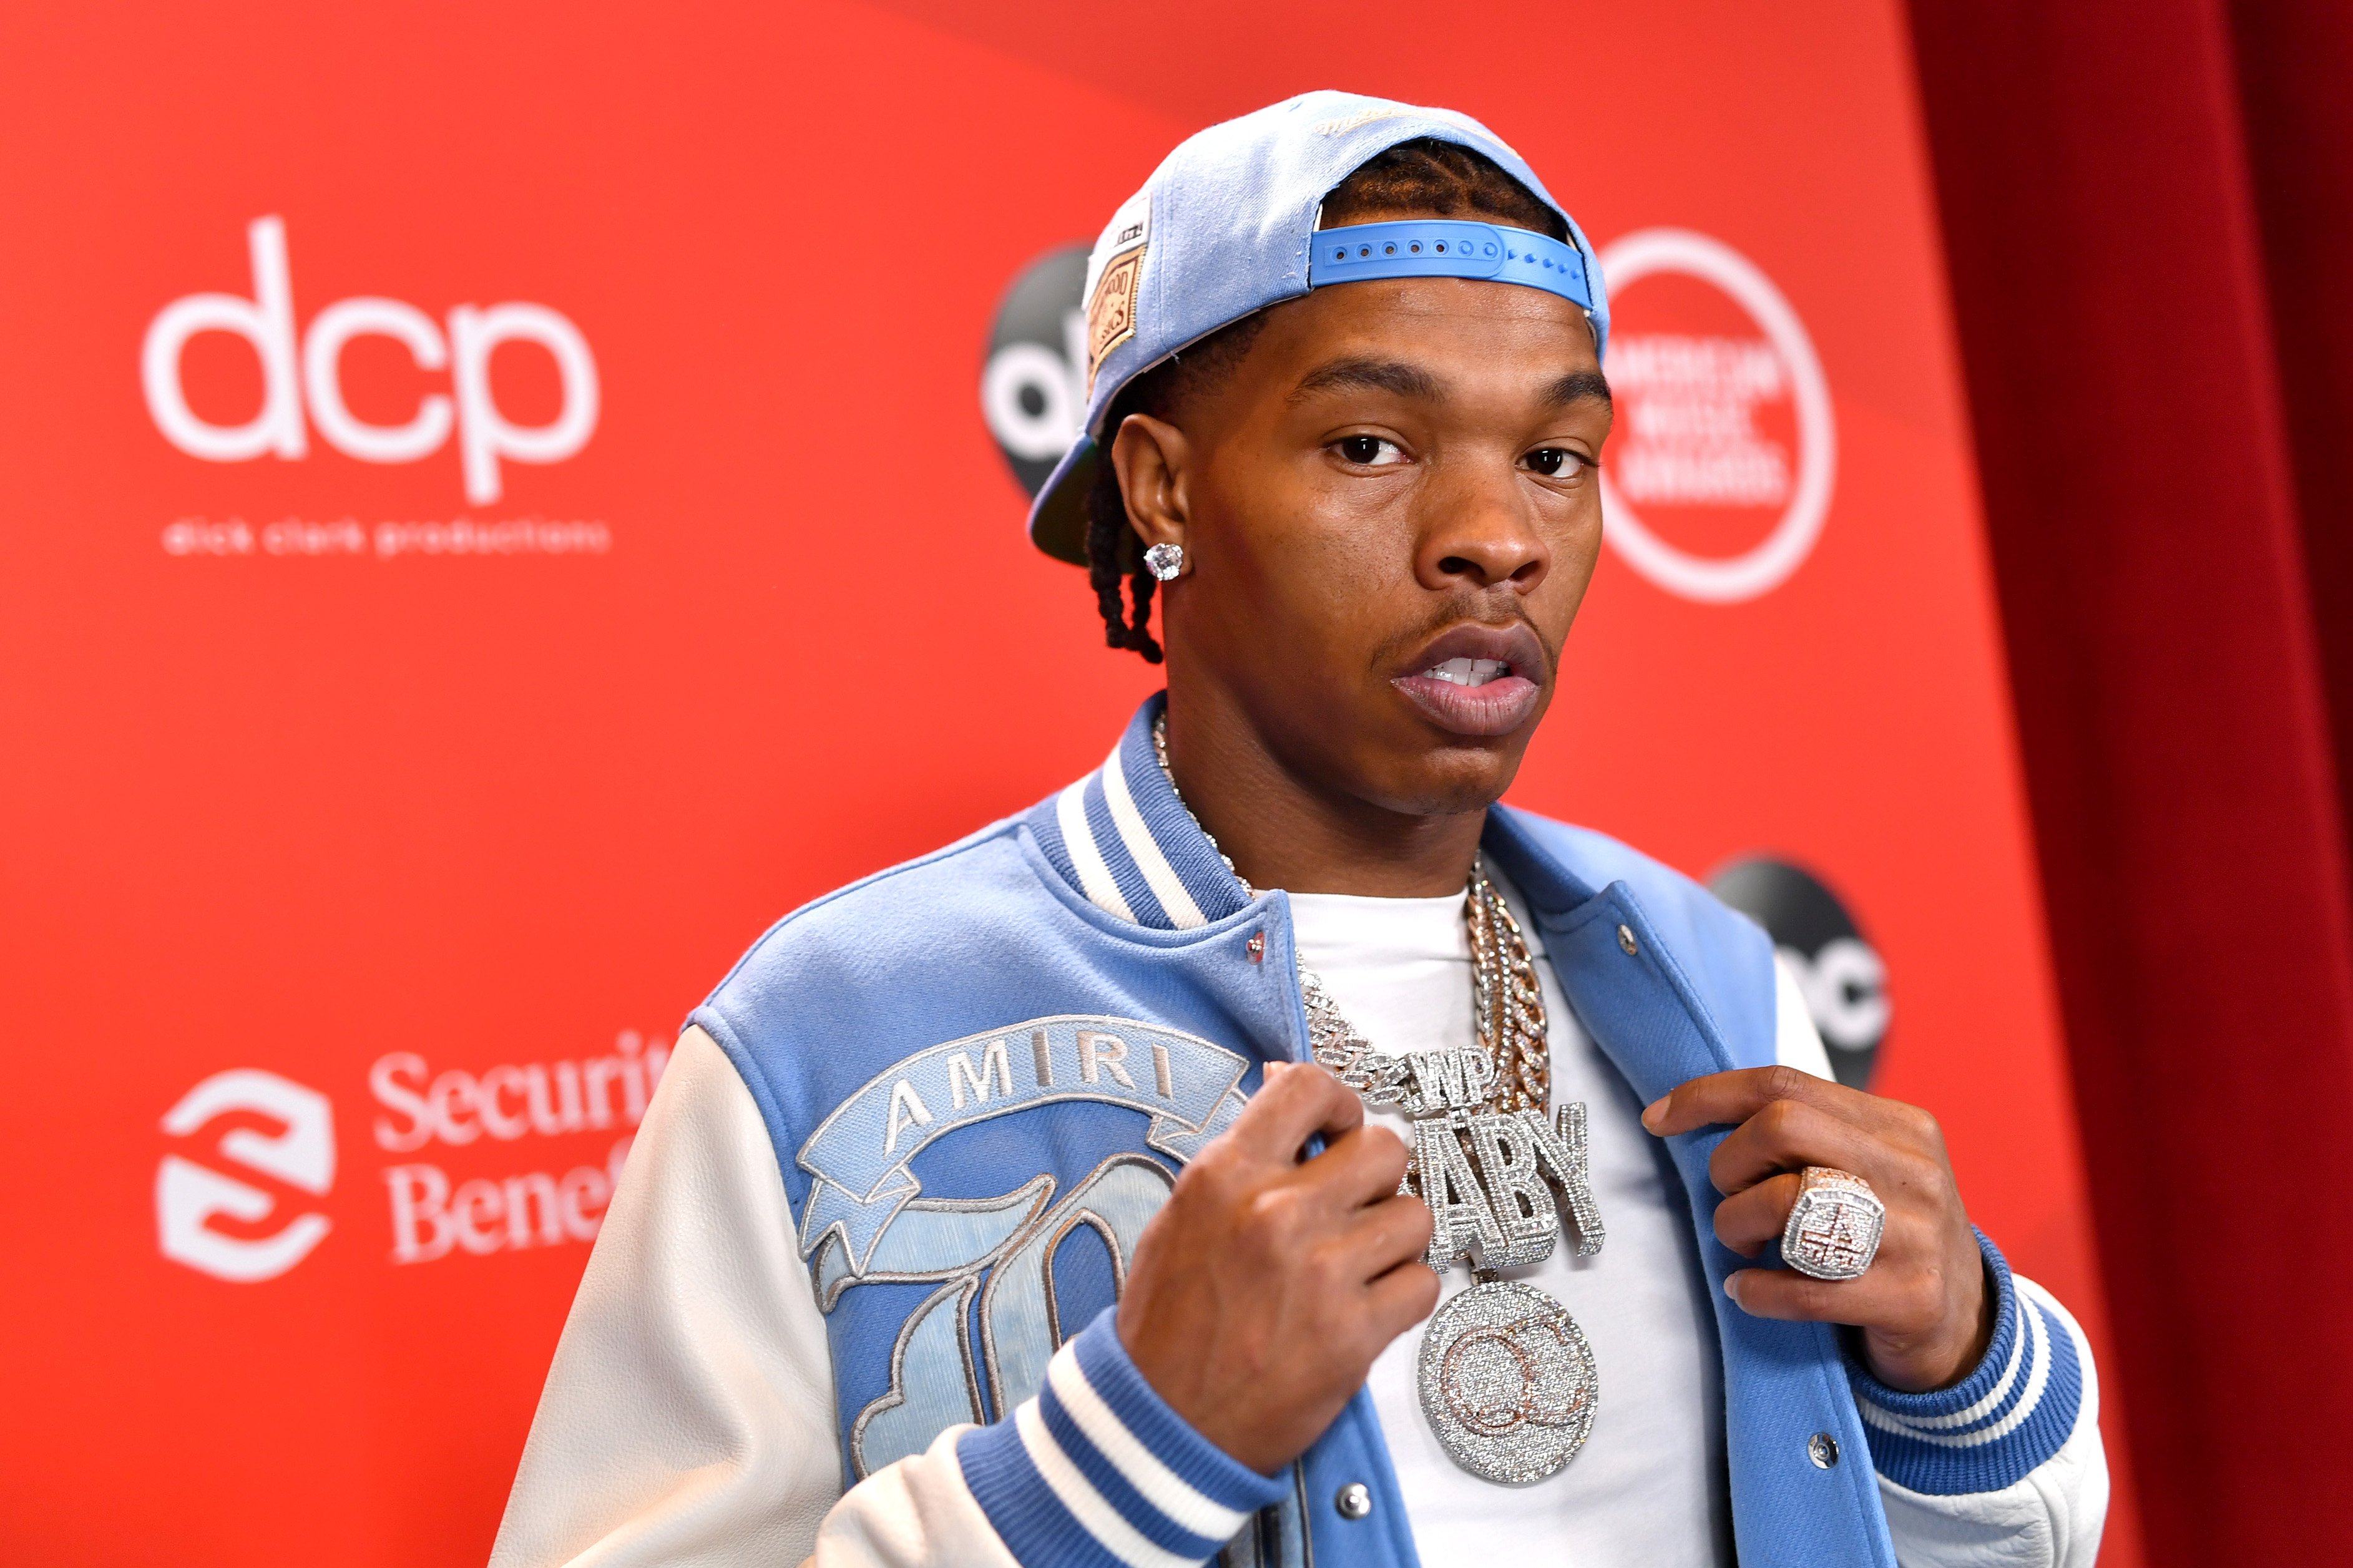 Lil Baby to Donate Money from ‘The Bigger Picture’ Sales